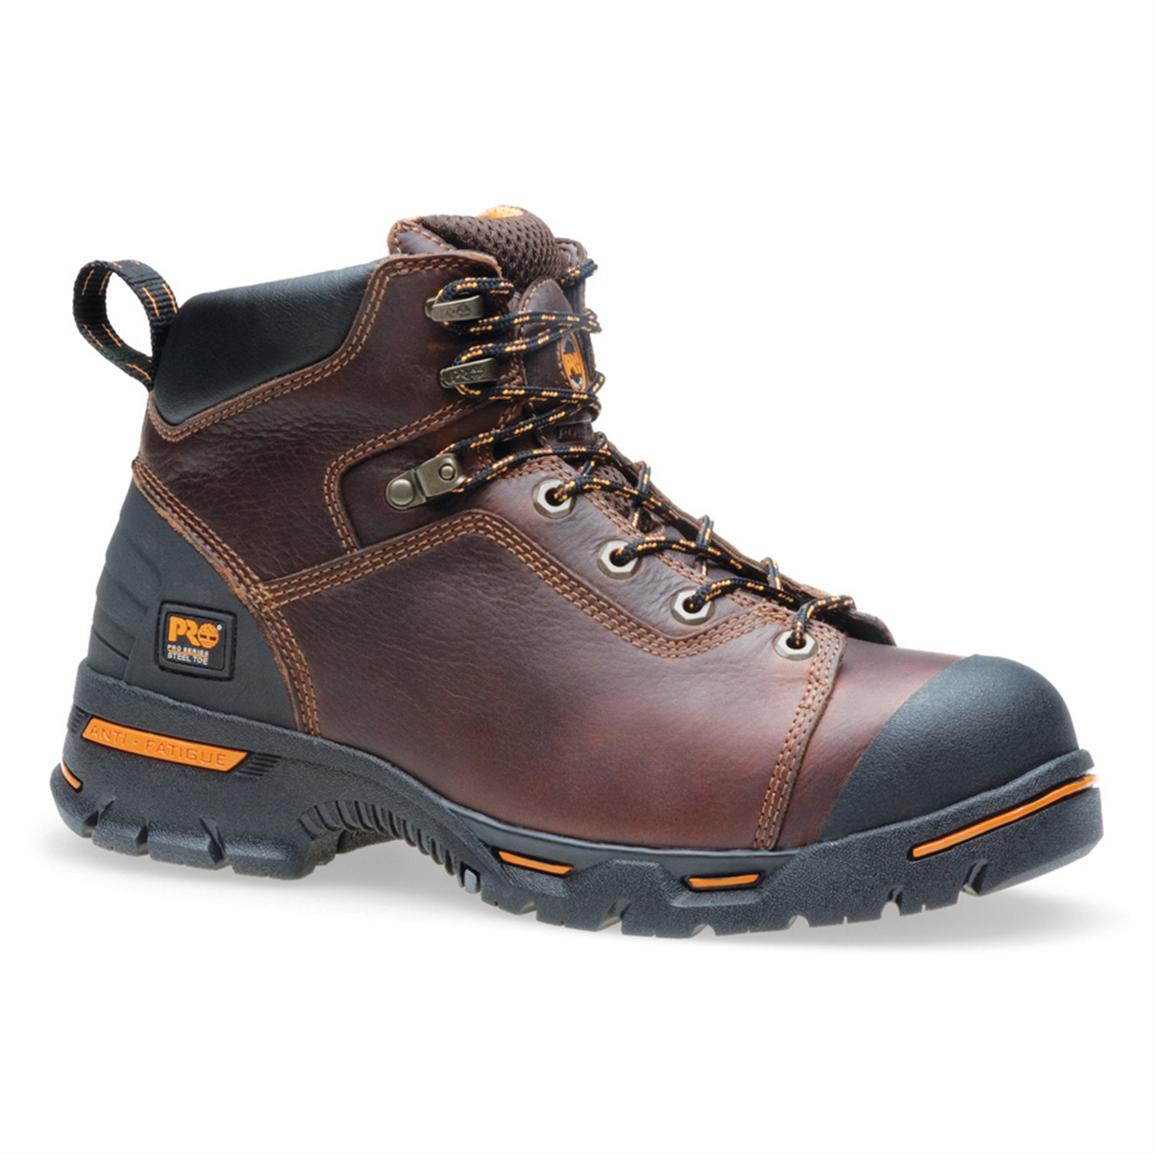 Men's 6" Timberland Pro® Endurance™ Boots, Briar - 283876, Work Boots at Sportsman's Guide